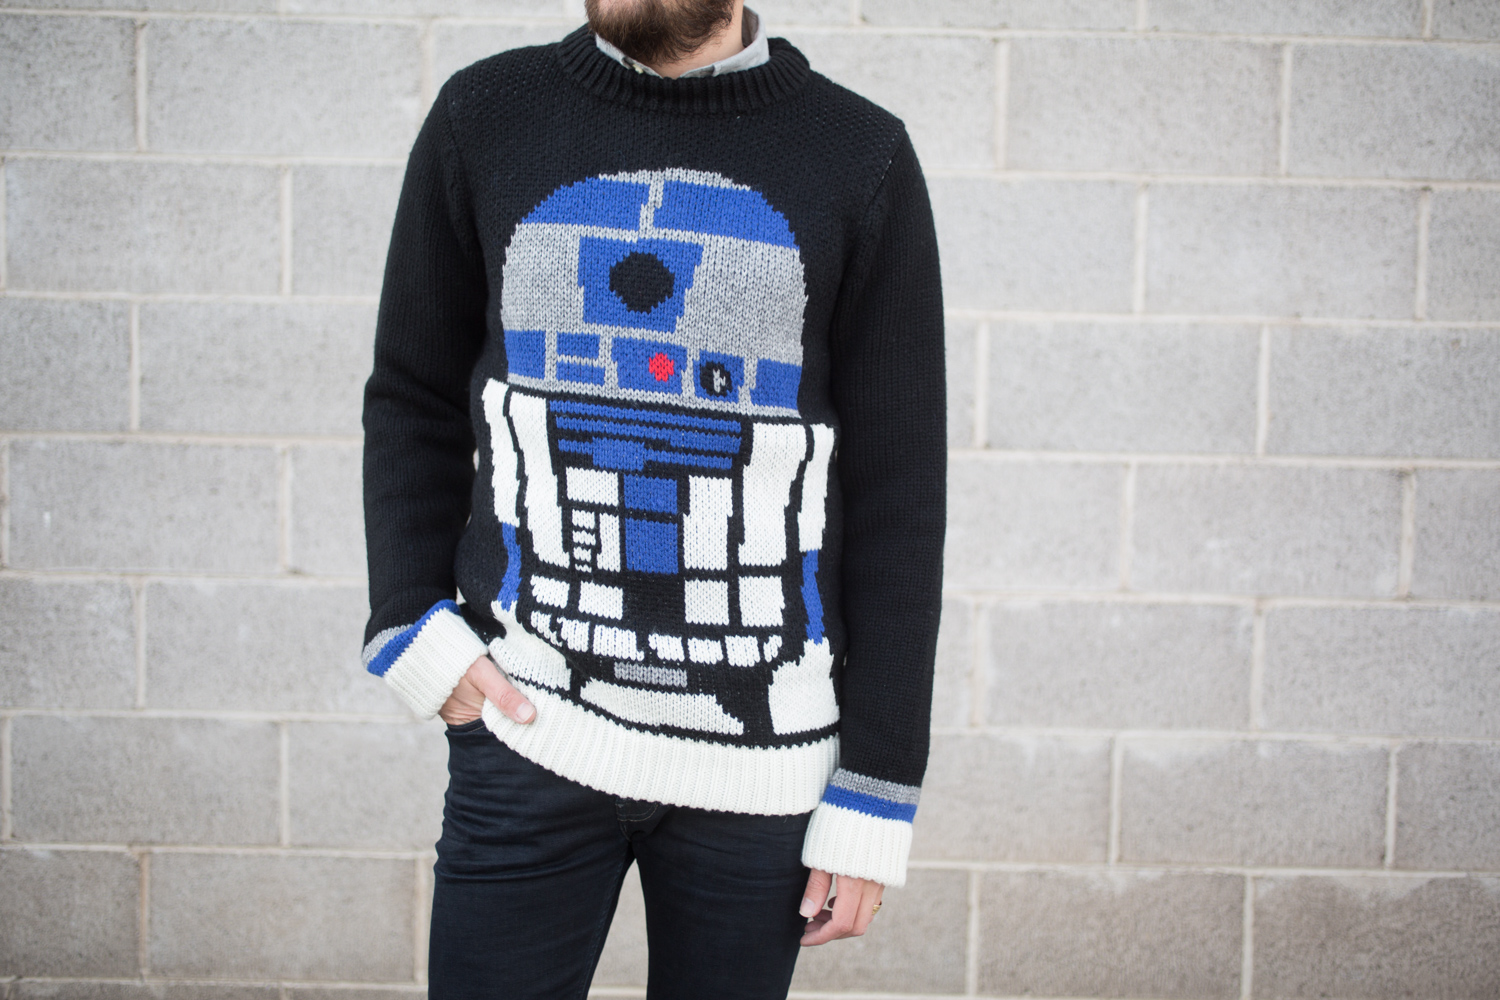 Elevnises r2d2 Star Wars sweater from Revolve clothing